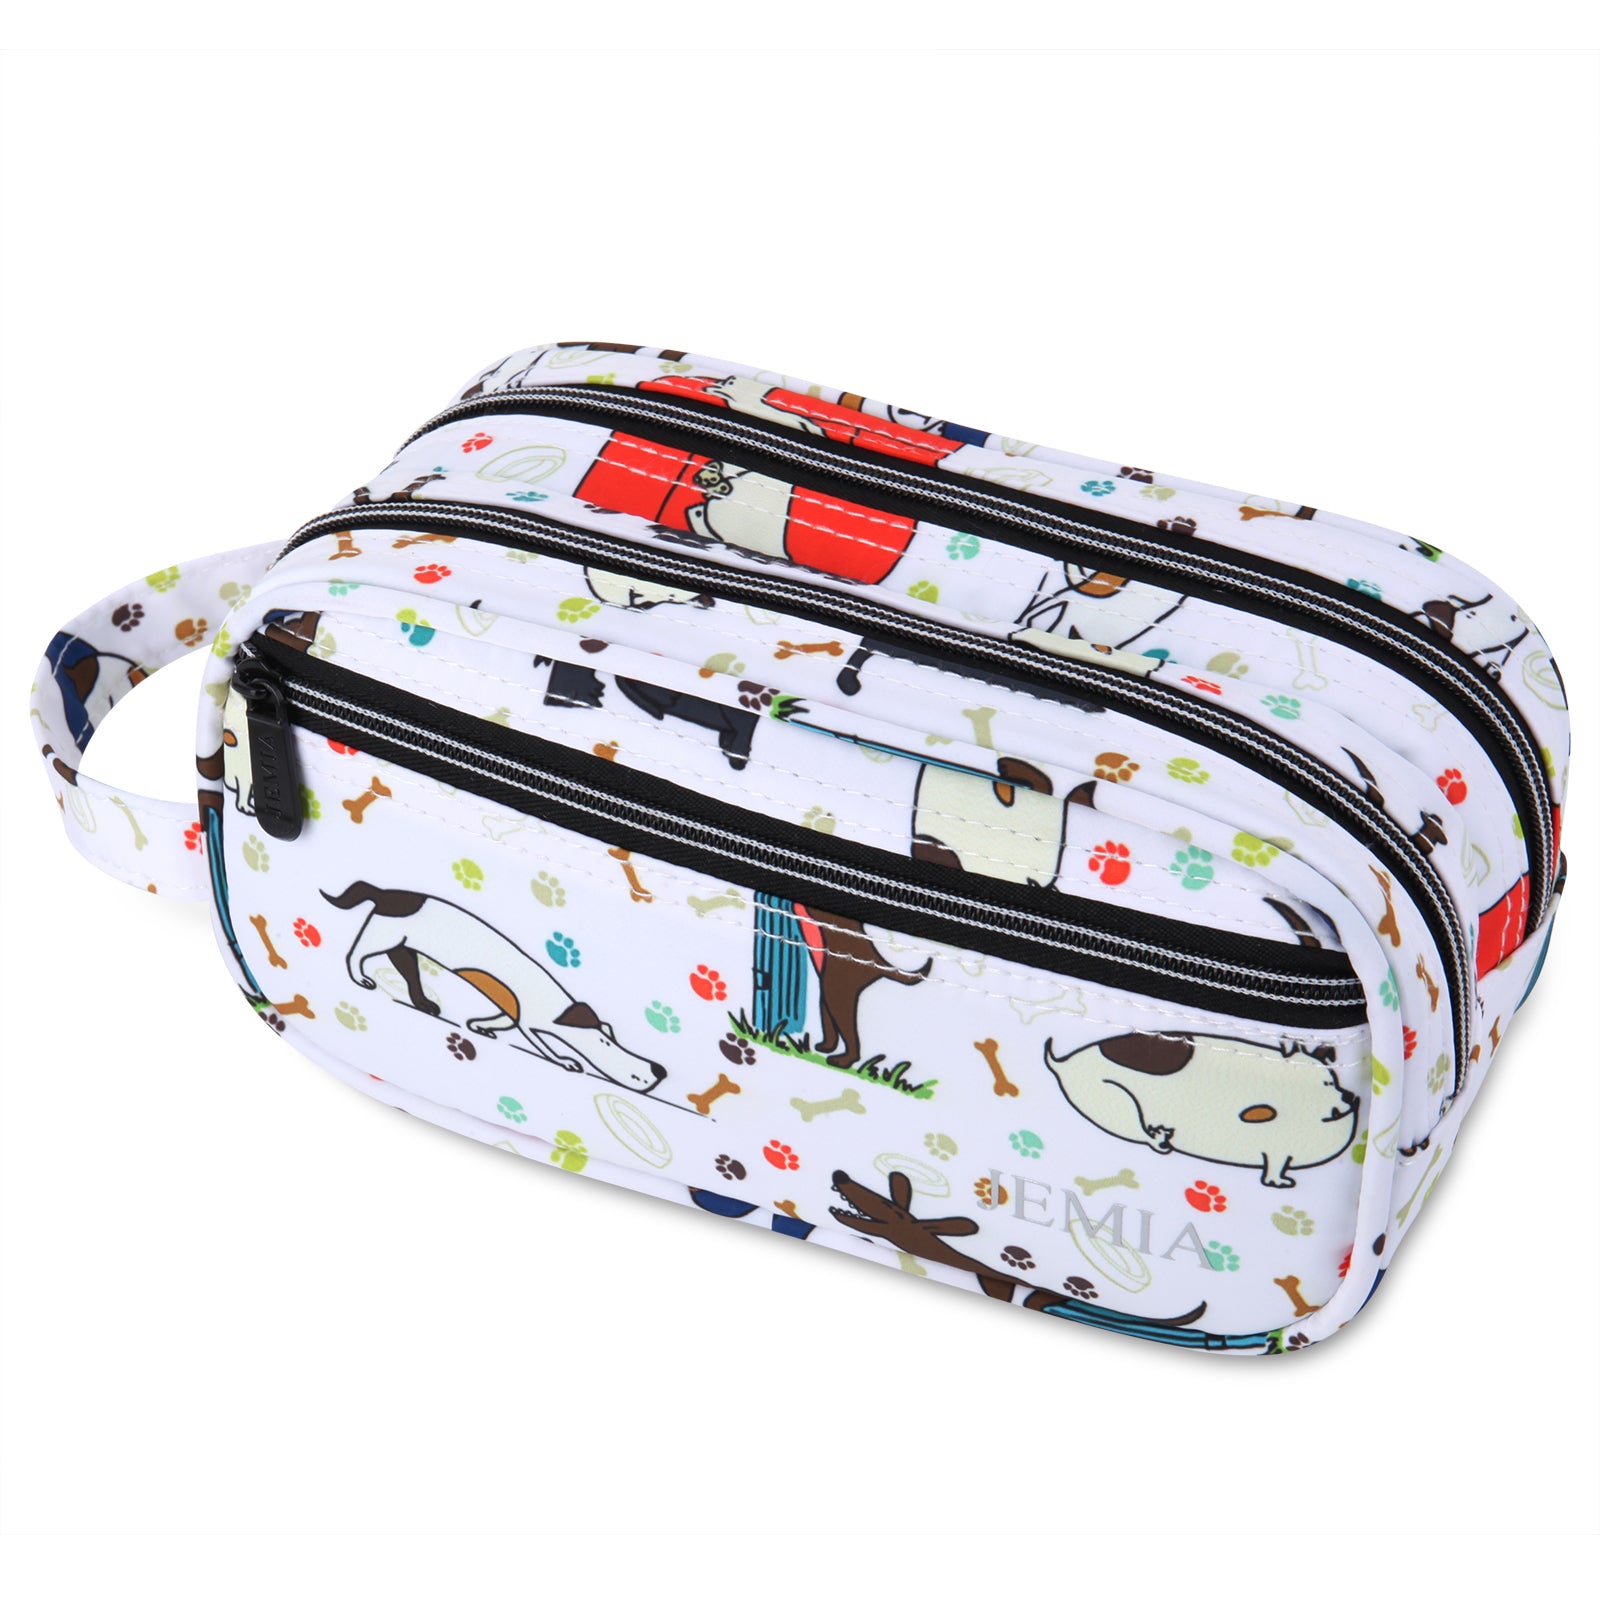 Jemia Geometric Pencil Case with 2 Independent Compartments (Polyester)